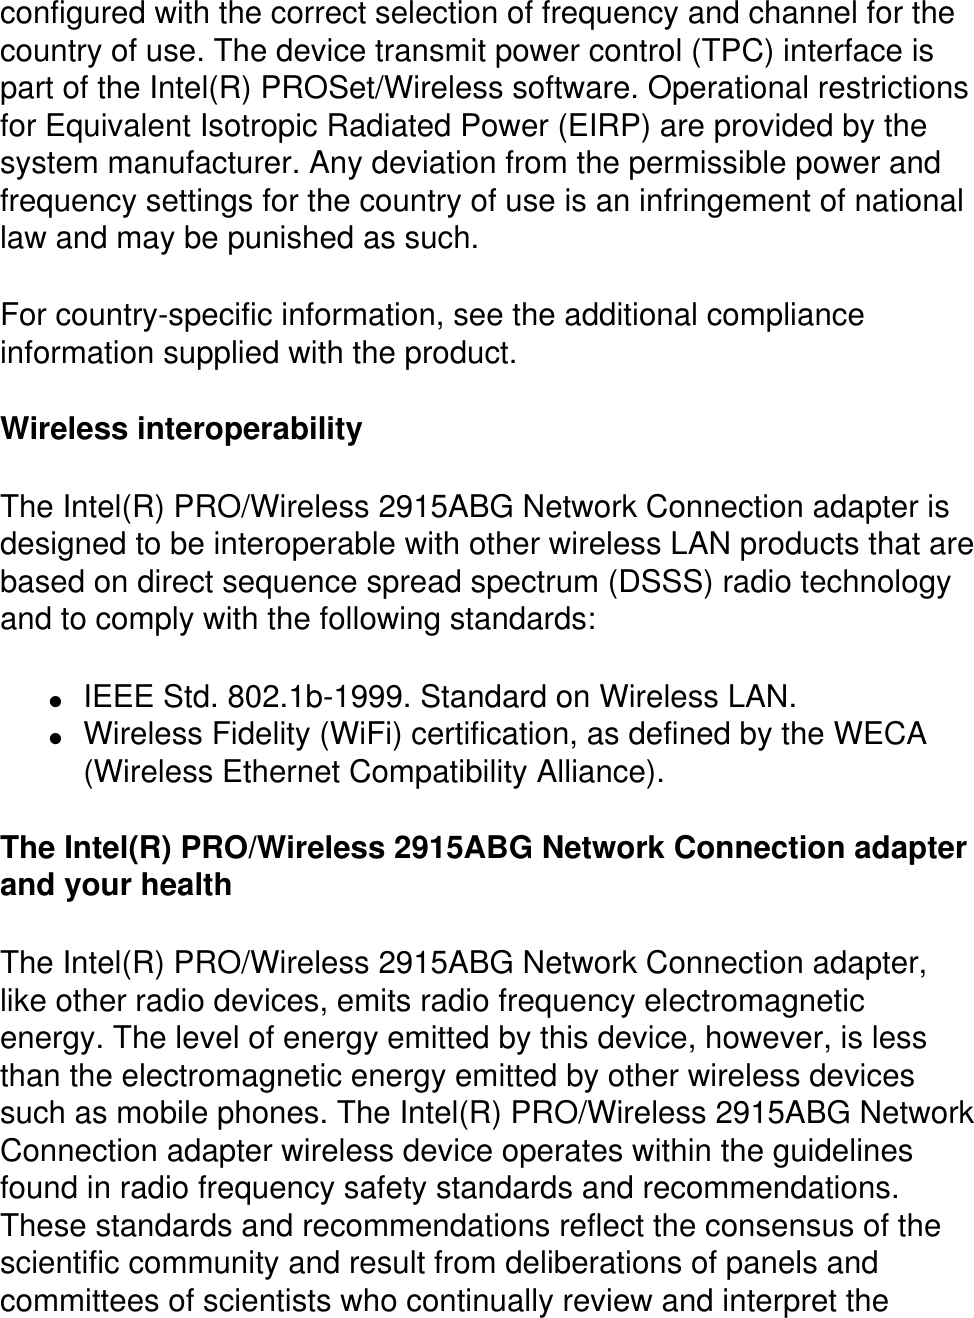 configured with the correct selection of frequency and channel for the country of use. The device transmit power control (TPC) interface is part of the Intel(R) PROSet/Wireless software. Operational restrictions for Equivalent Isotropic Radiated Power (EIRP) are provided by the system manufacturer. Any deviation from the permissible power and frequency settings for the country of use is an infringement of national law and may be punished as such. For country-specific information, see the additional compliance information supplied with the product. Wireless interoperabilityThe Intel(R) PRO/Wireless 2915ABG Network Connection adapter is designed to be interoperable with other wireless LAN products that are based on direct sequence spread spectrum (DSSS) radio technology and to comply with the following standards:●     IEEE Std. 802.1b-1999. Standard on Wireless LAN. ●     Wireless Fidelity (WiFi) certification, as defined by the WECA (Wireless Ethernet Compatibility Alliance).The Intel(R) PRO/Wireless 2915ABG Network Connection adapter and your healthThe Intel(R) PRO/Wireless 2915ABG Network Connection adapter, like other radio devices, emits radio frequency electromagnetic energy. The level of energy emitted by this device, however, is less than the electromagnetic energy emitted by other wireless devices such as mobile phones. The Intel(R) PRO/Wireless 2915ABG Network Connection adapter wireless device operates within the guidelines found in radio frequency safety standards and recommendations. These standards and recommendations reflect the consensus of the scientific community and result from deliberations of panels and committees of scientists who continually review and interpret the 